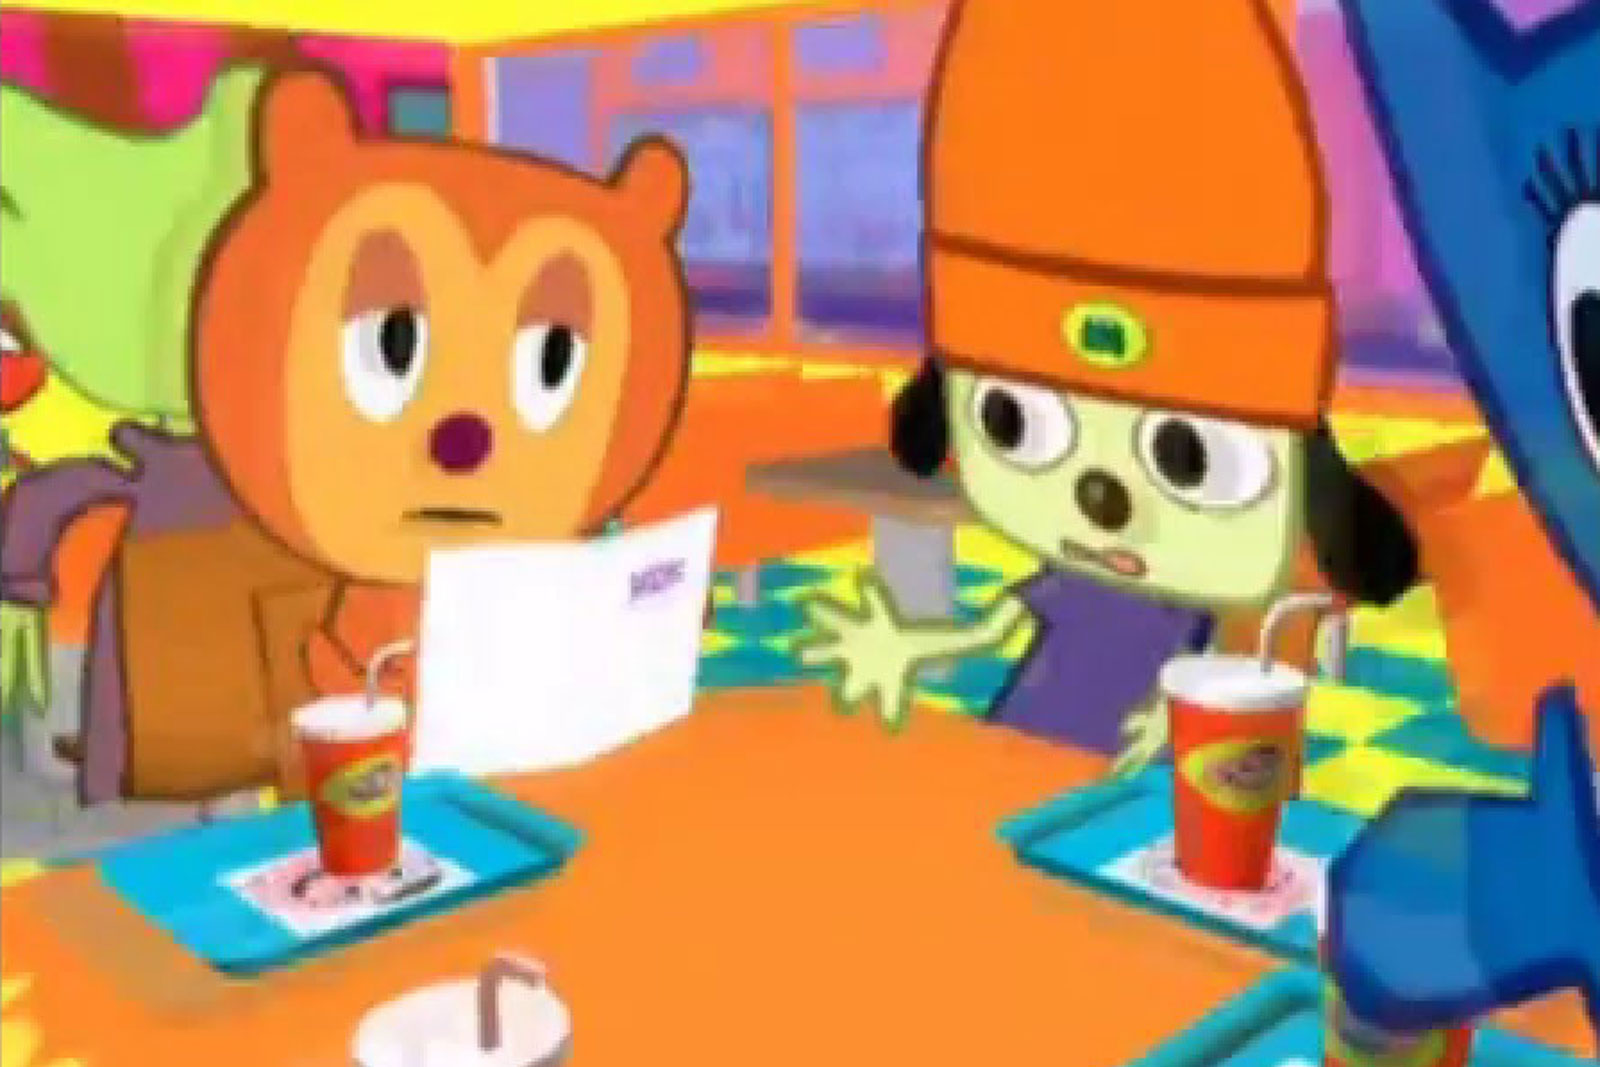 PaRappa the Rapper' comes back as an anime series.